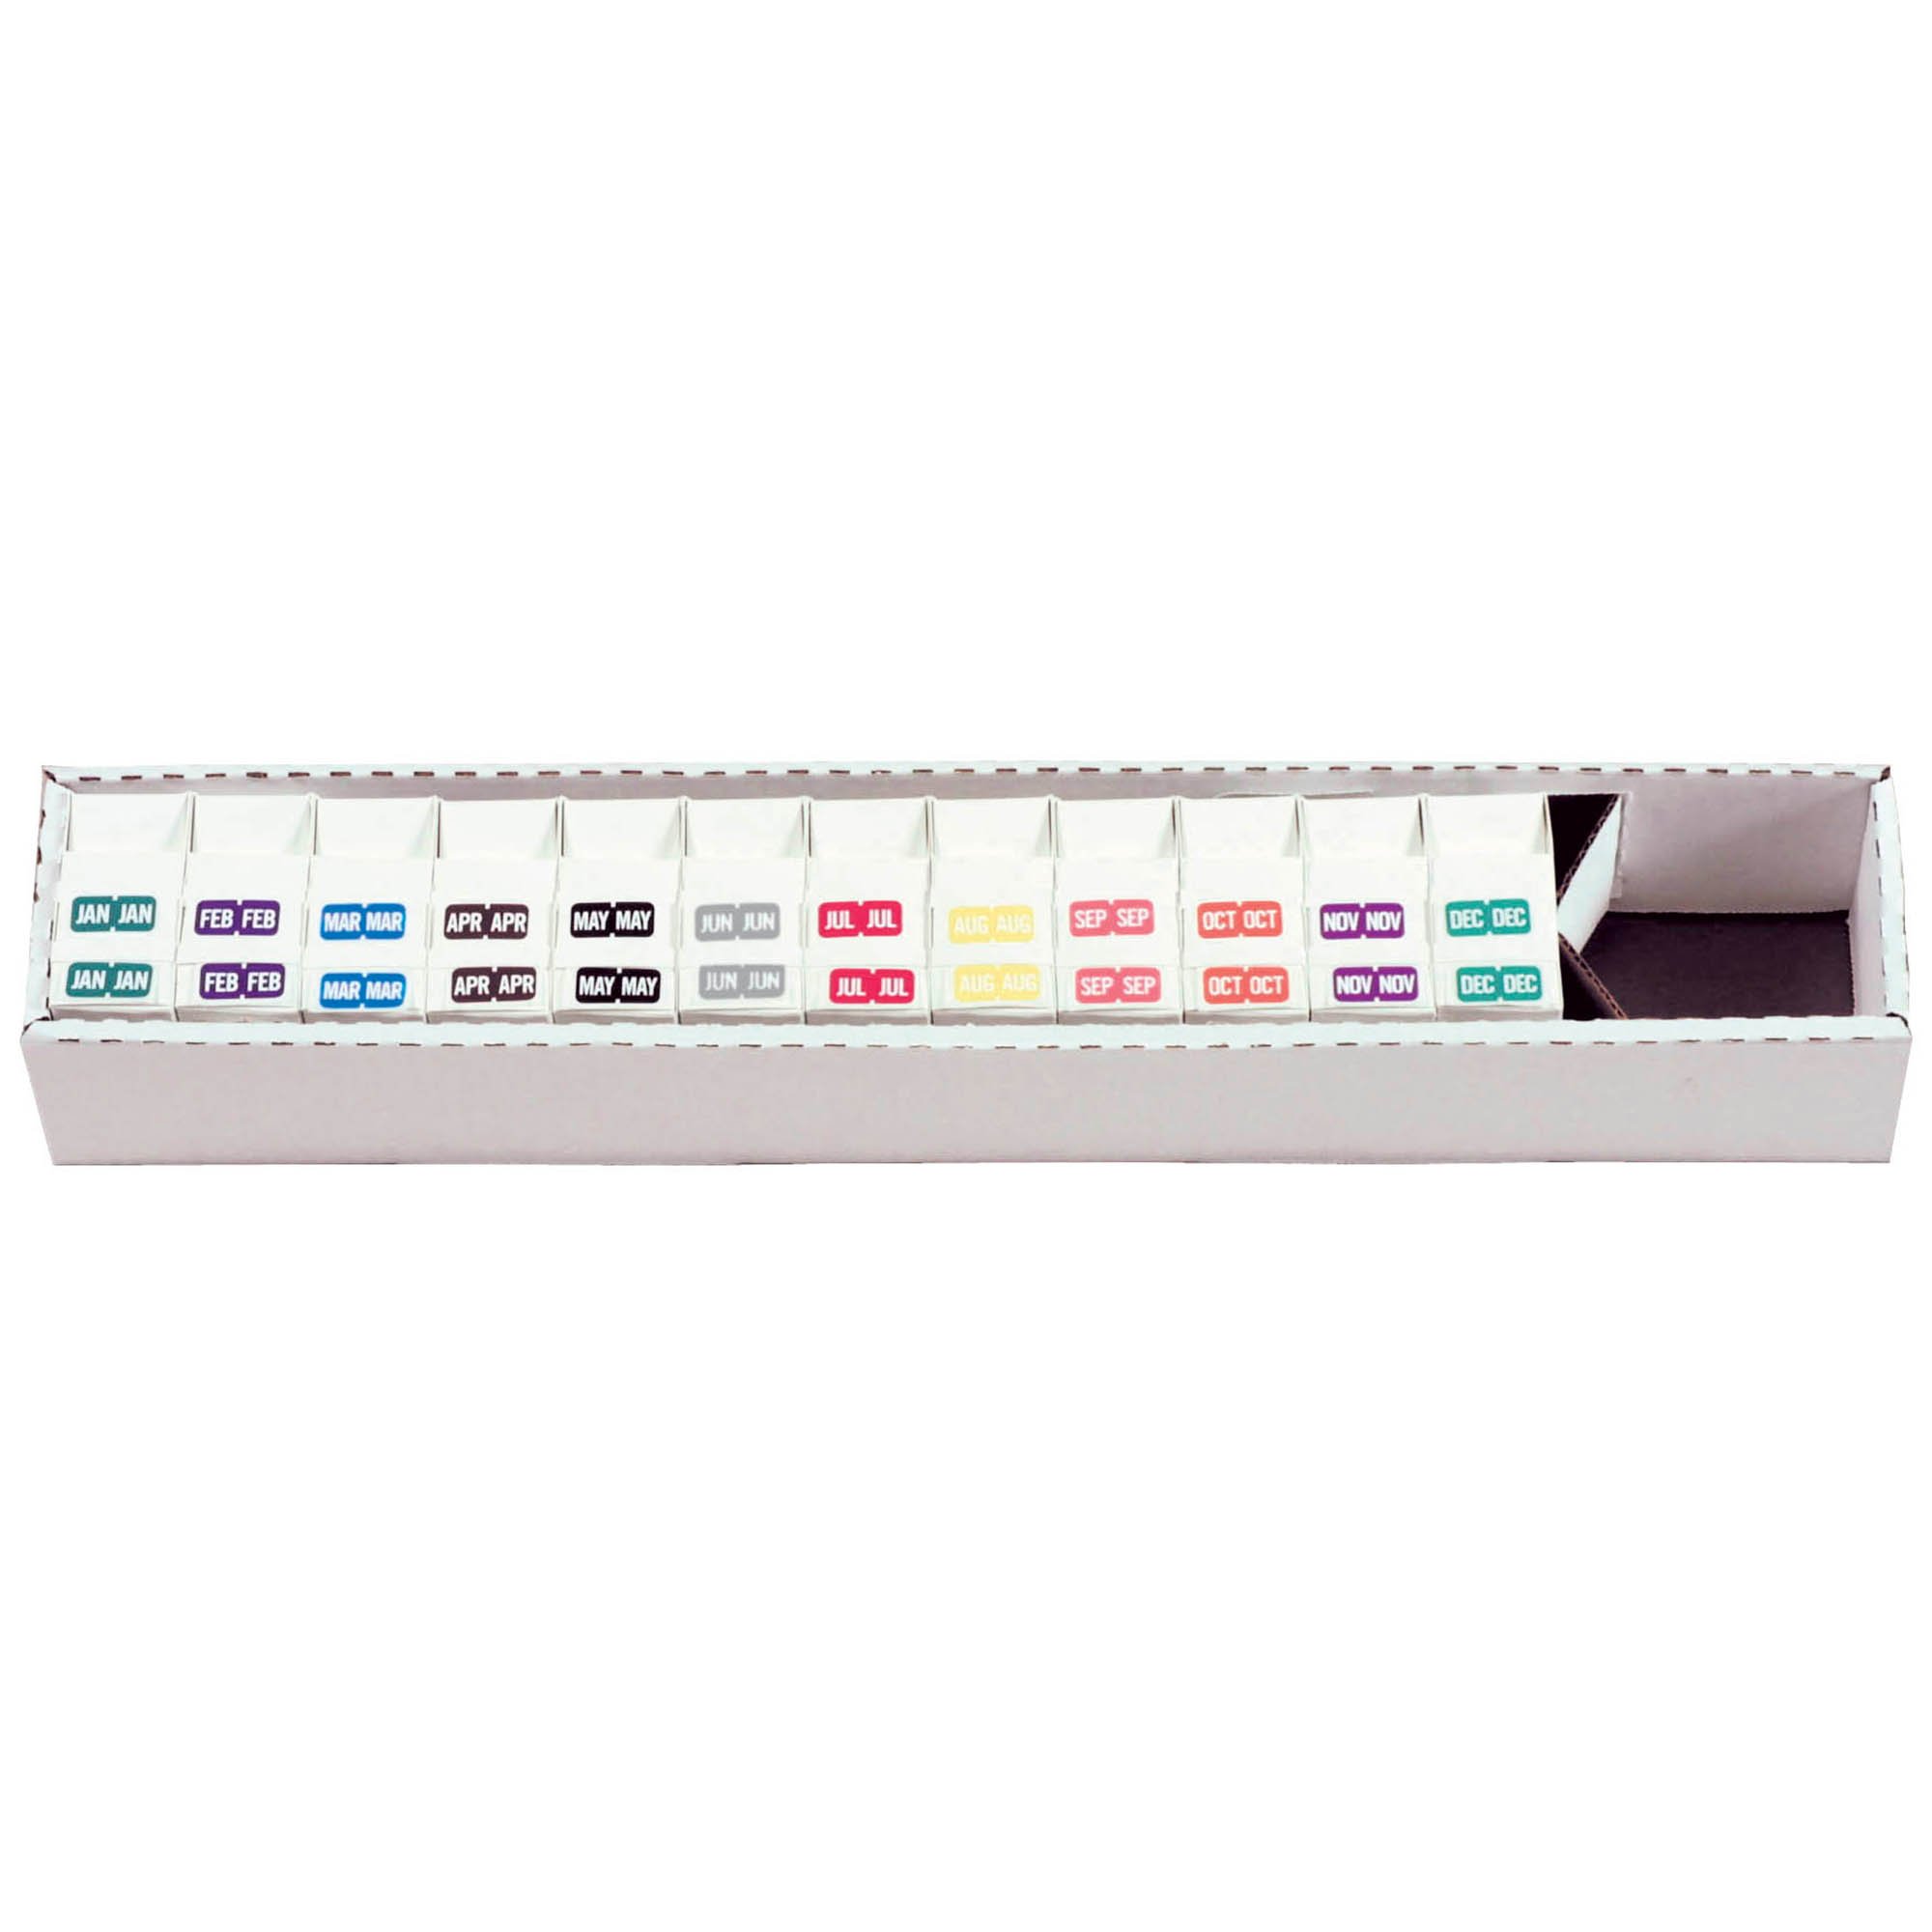 Tab Products 1279 Match A1279 Series Month Code Roll Labels - Set of Jan to Dec